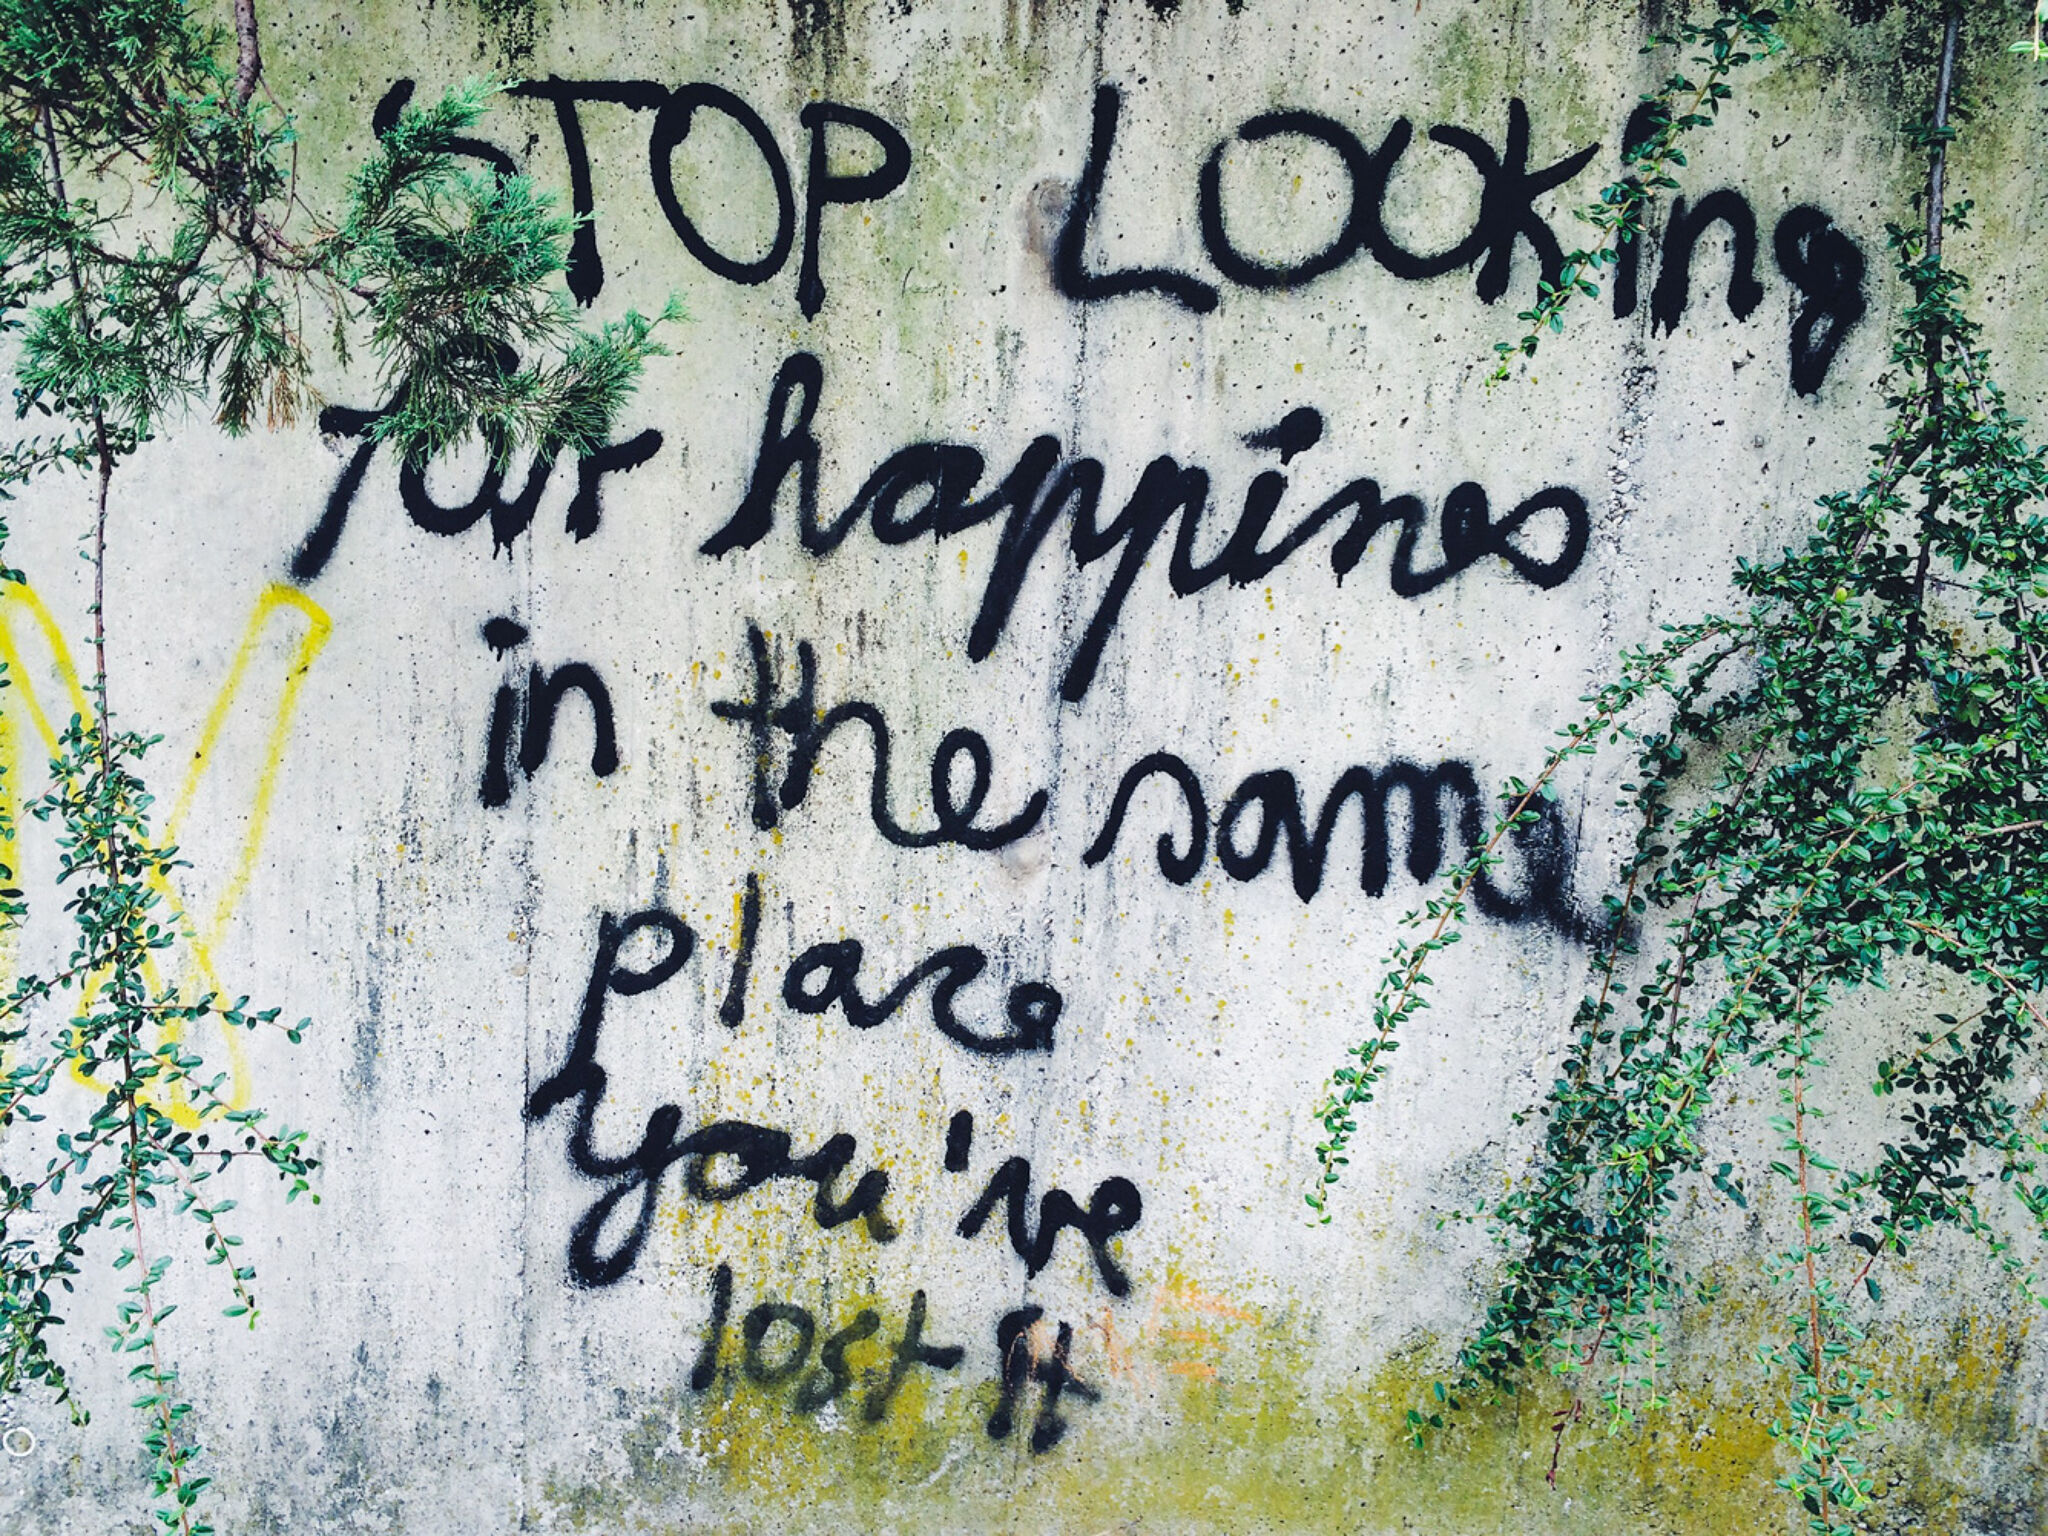 &mdash;Stop looking for happiness